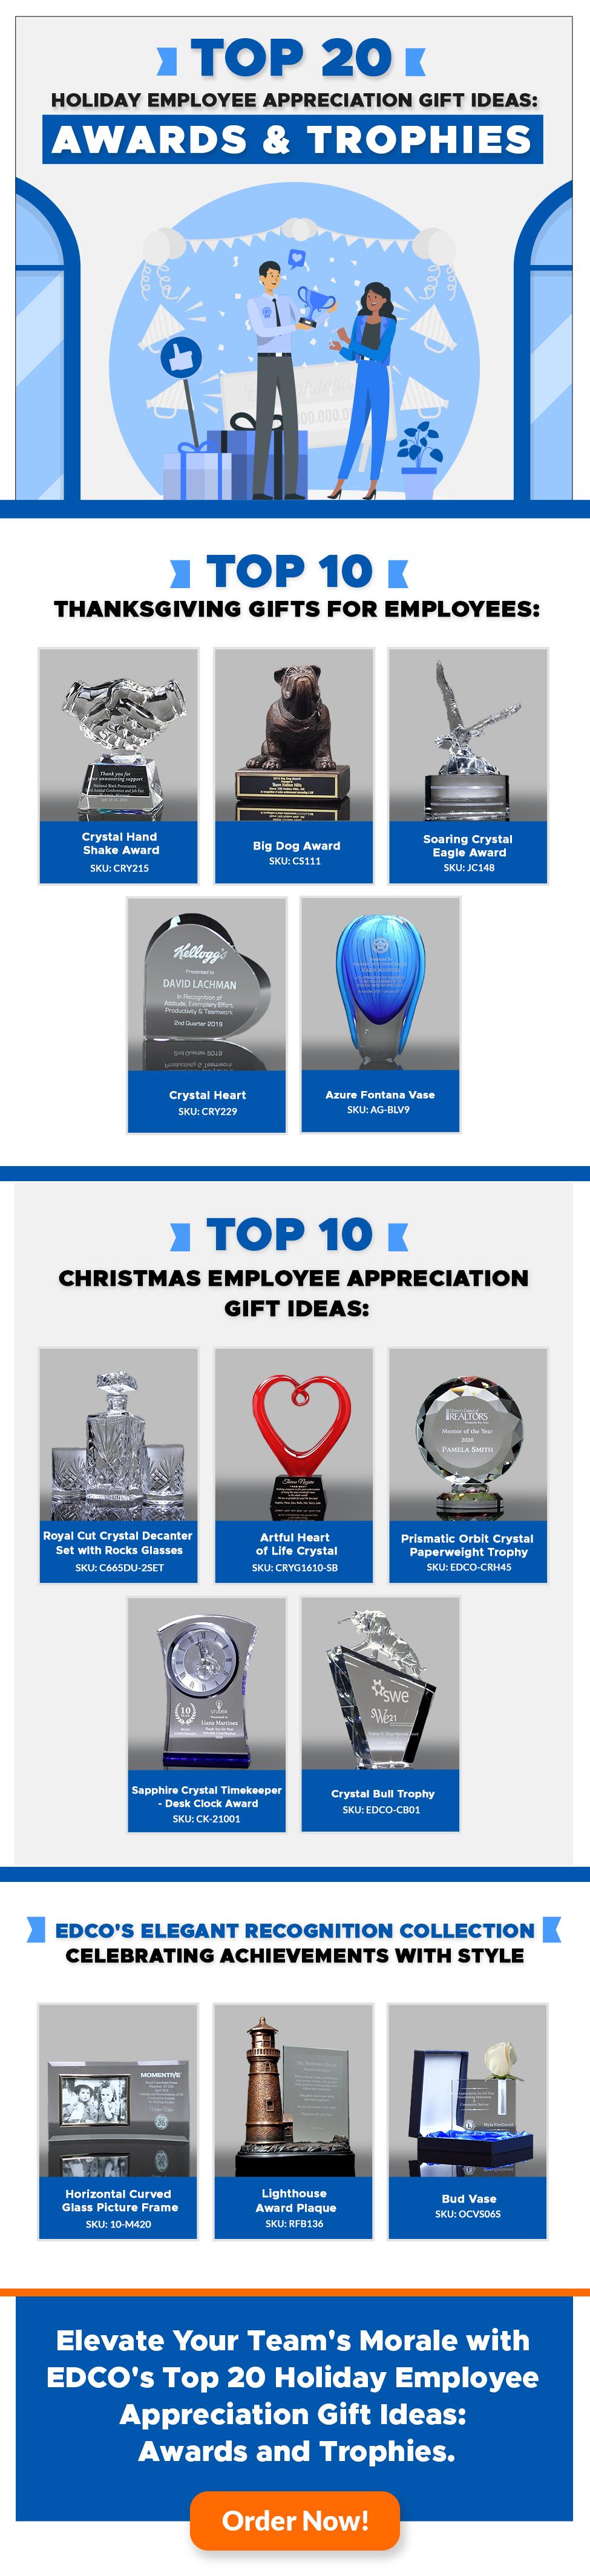 How To: Order Custom Employee Appreciation Gifts - Ideas Baudville